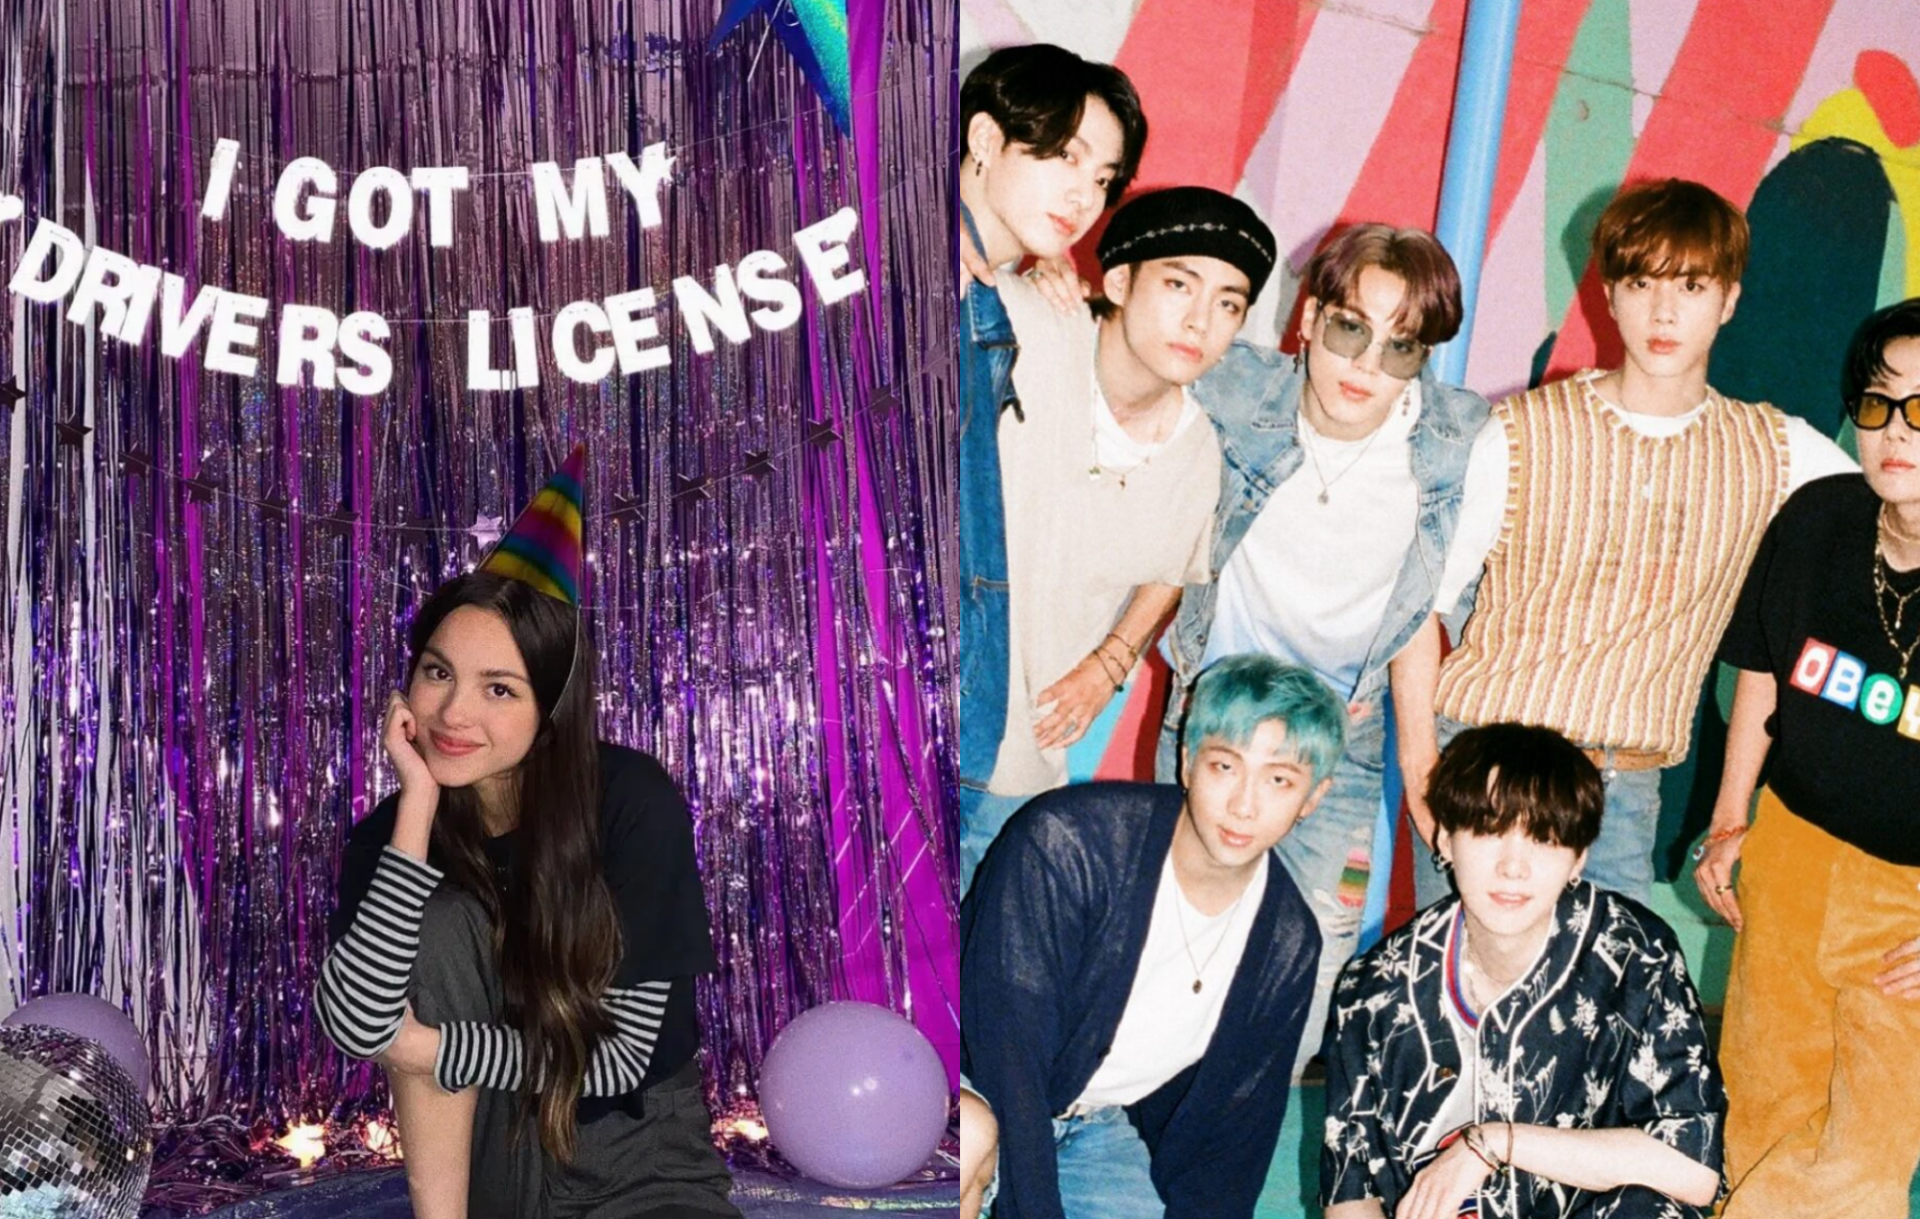 Olivia Rodrigo against a 'I got my drivers license sign' and BTS in a group photo